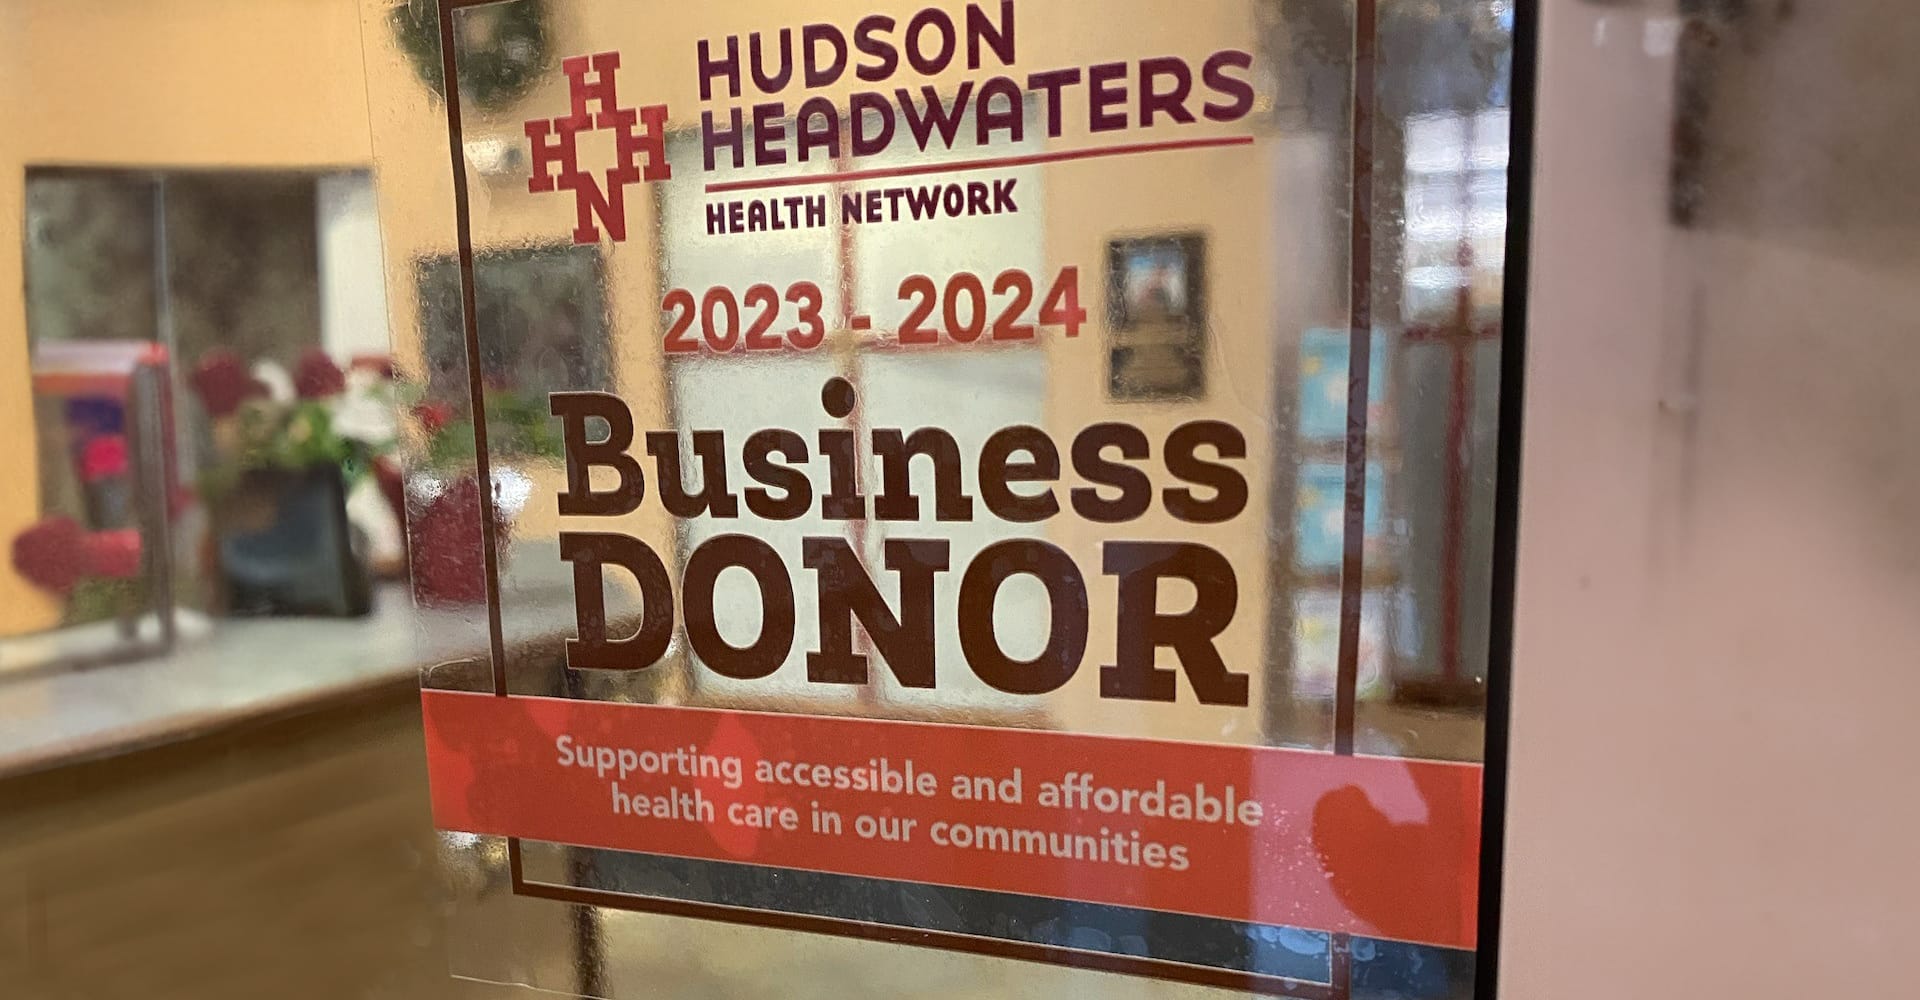 A window decal showing recognition for being a member of the 2023-2024 Business Donor Program